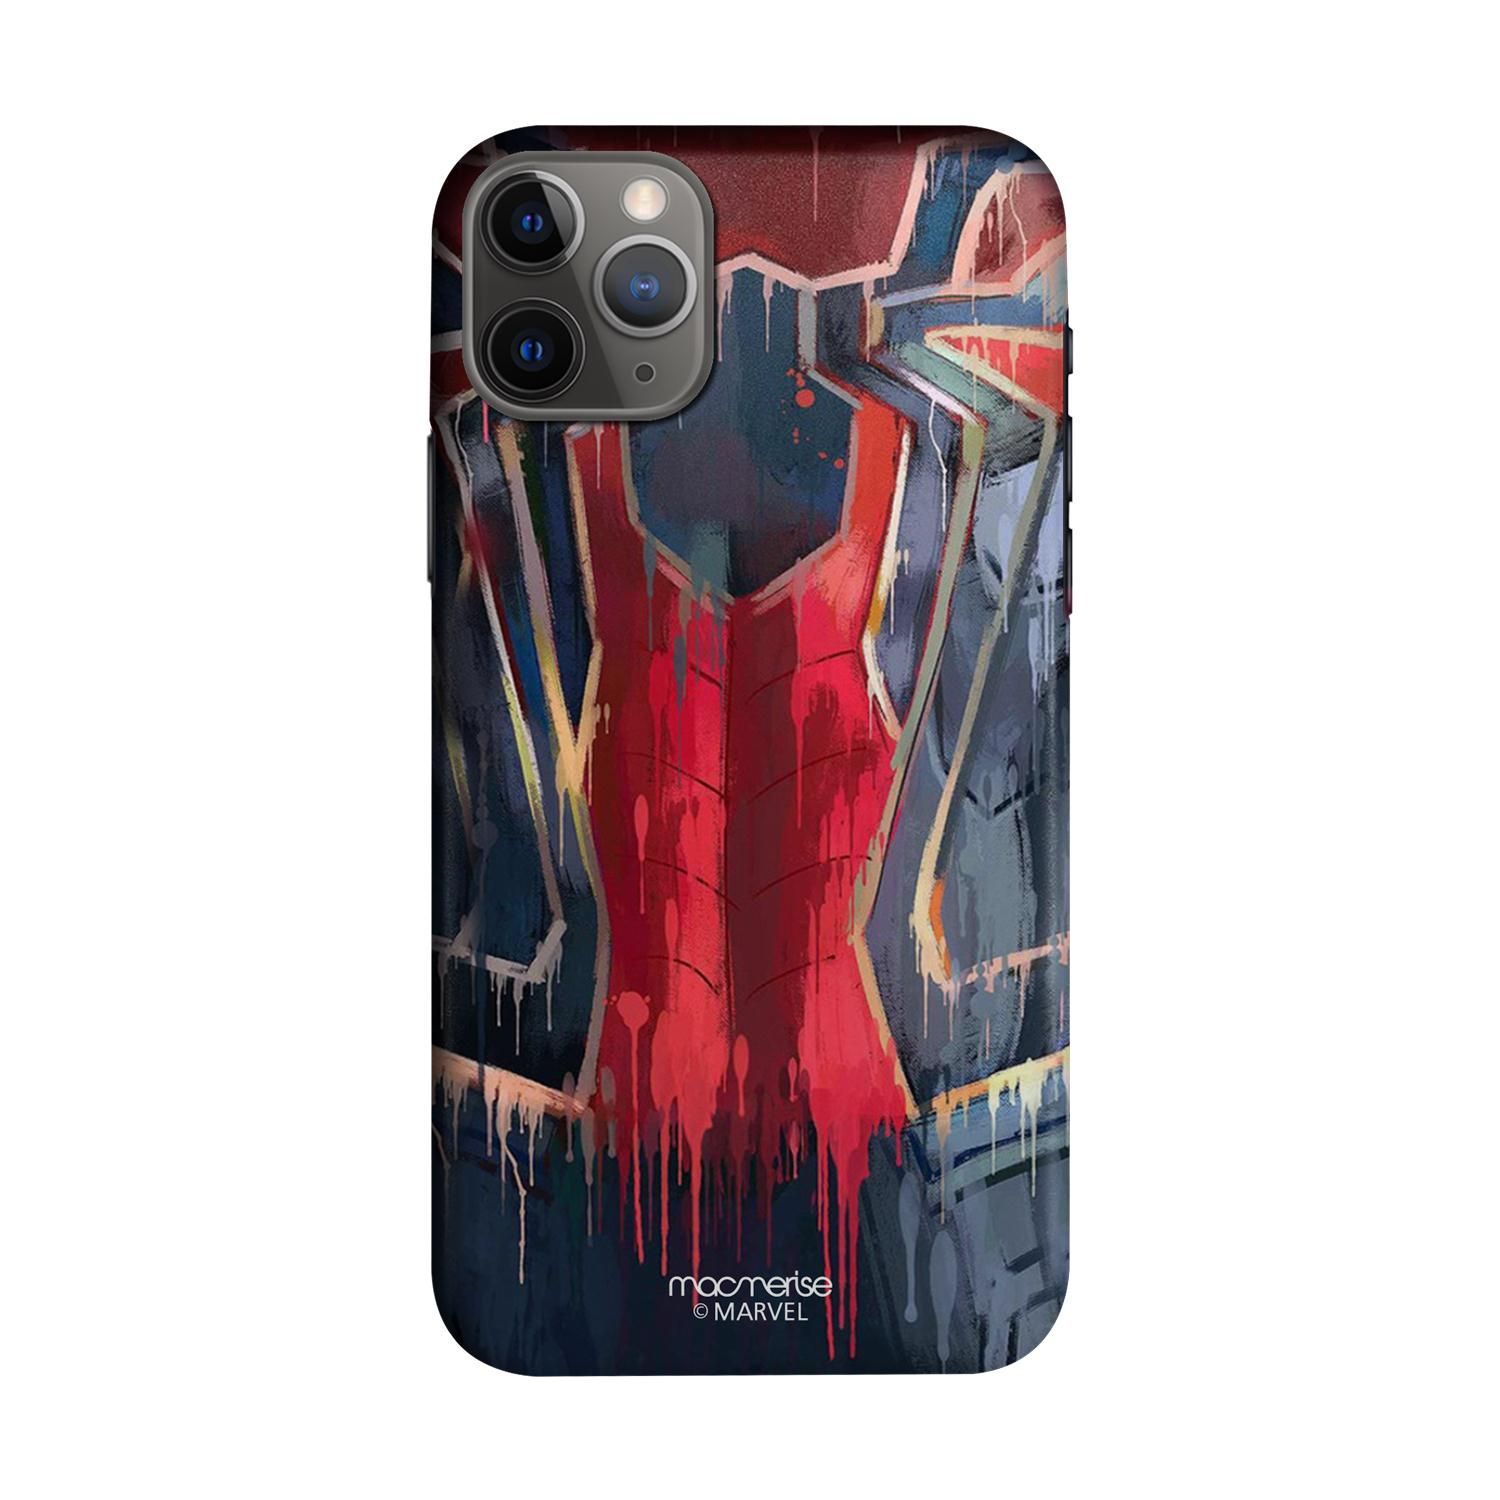 Buy Grunge Suit Spidey - Sleek Phone Case for iPhone 11 Pro Max Online